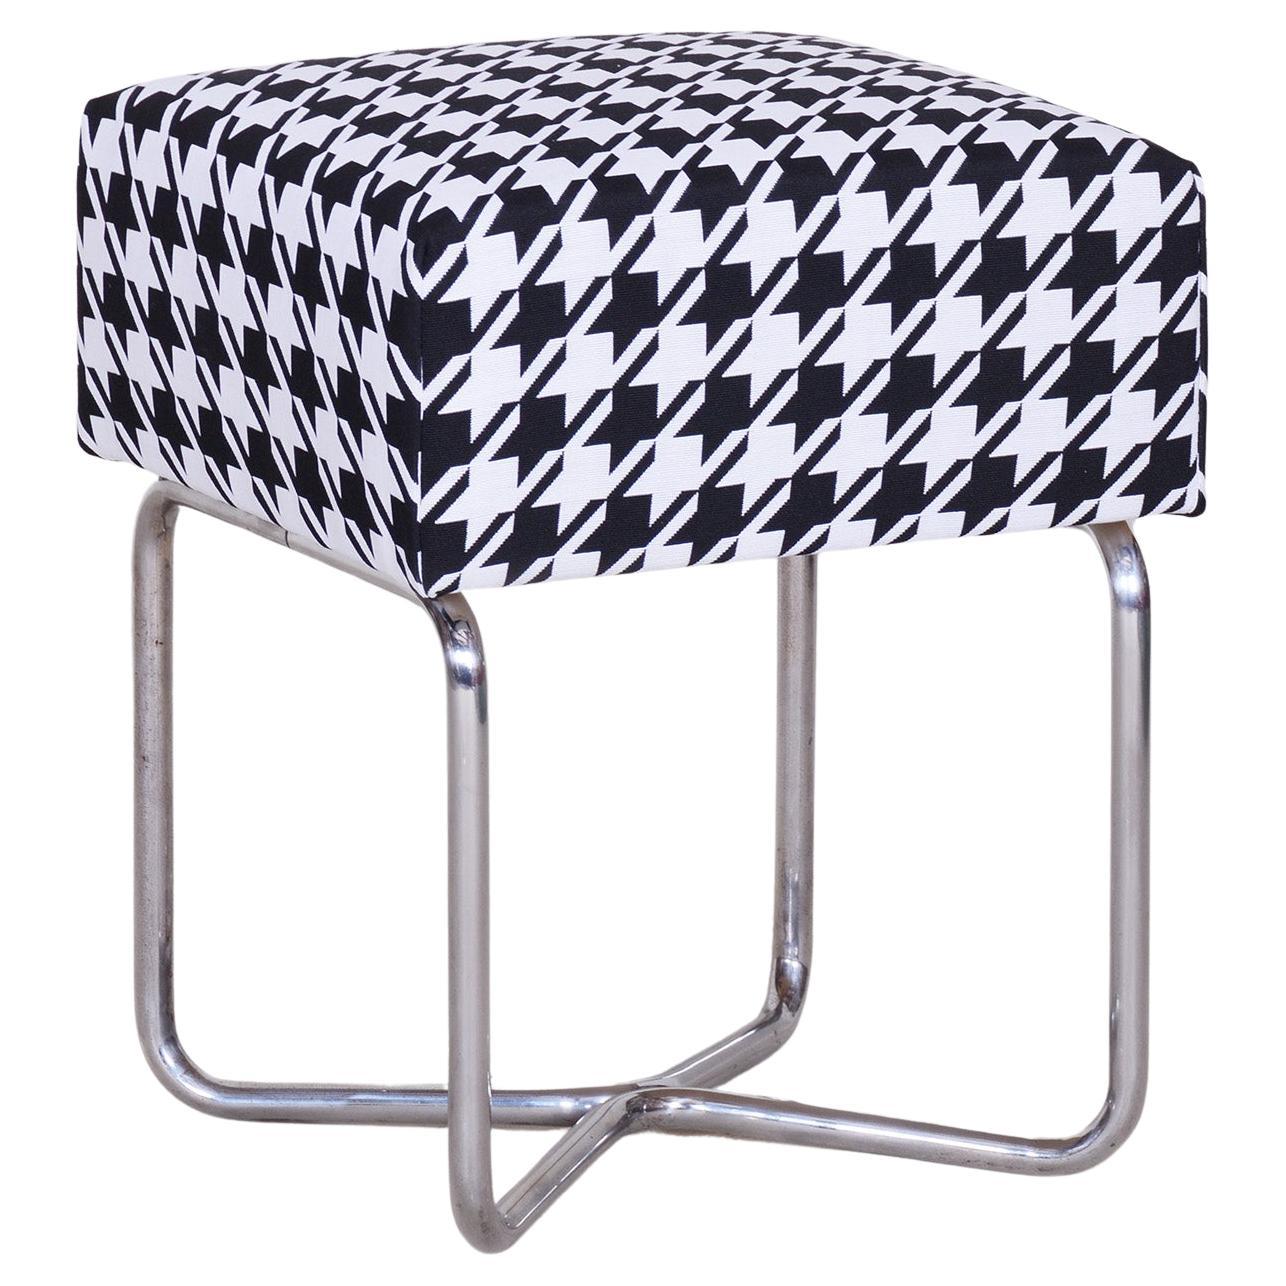 Small Chrome Black & White Stool by SAB, Made in the 1930s, New upholstery